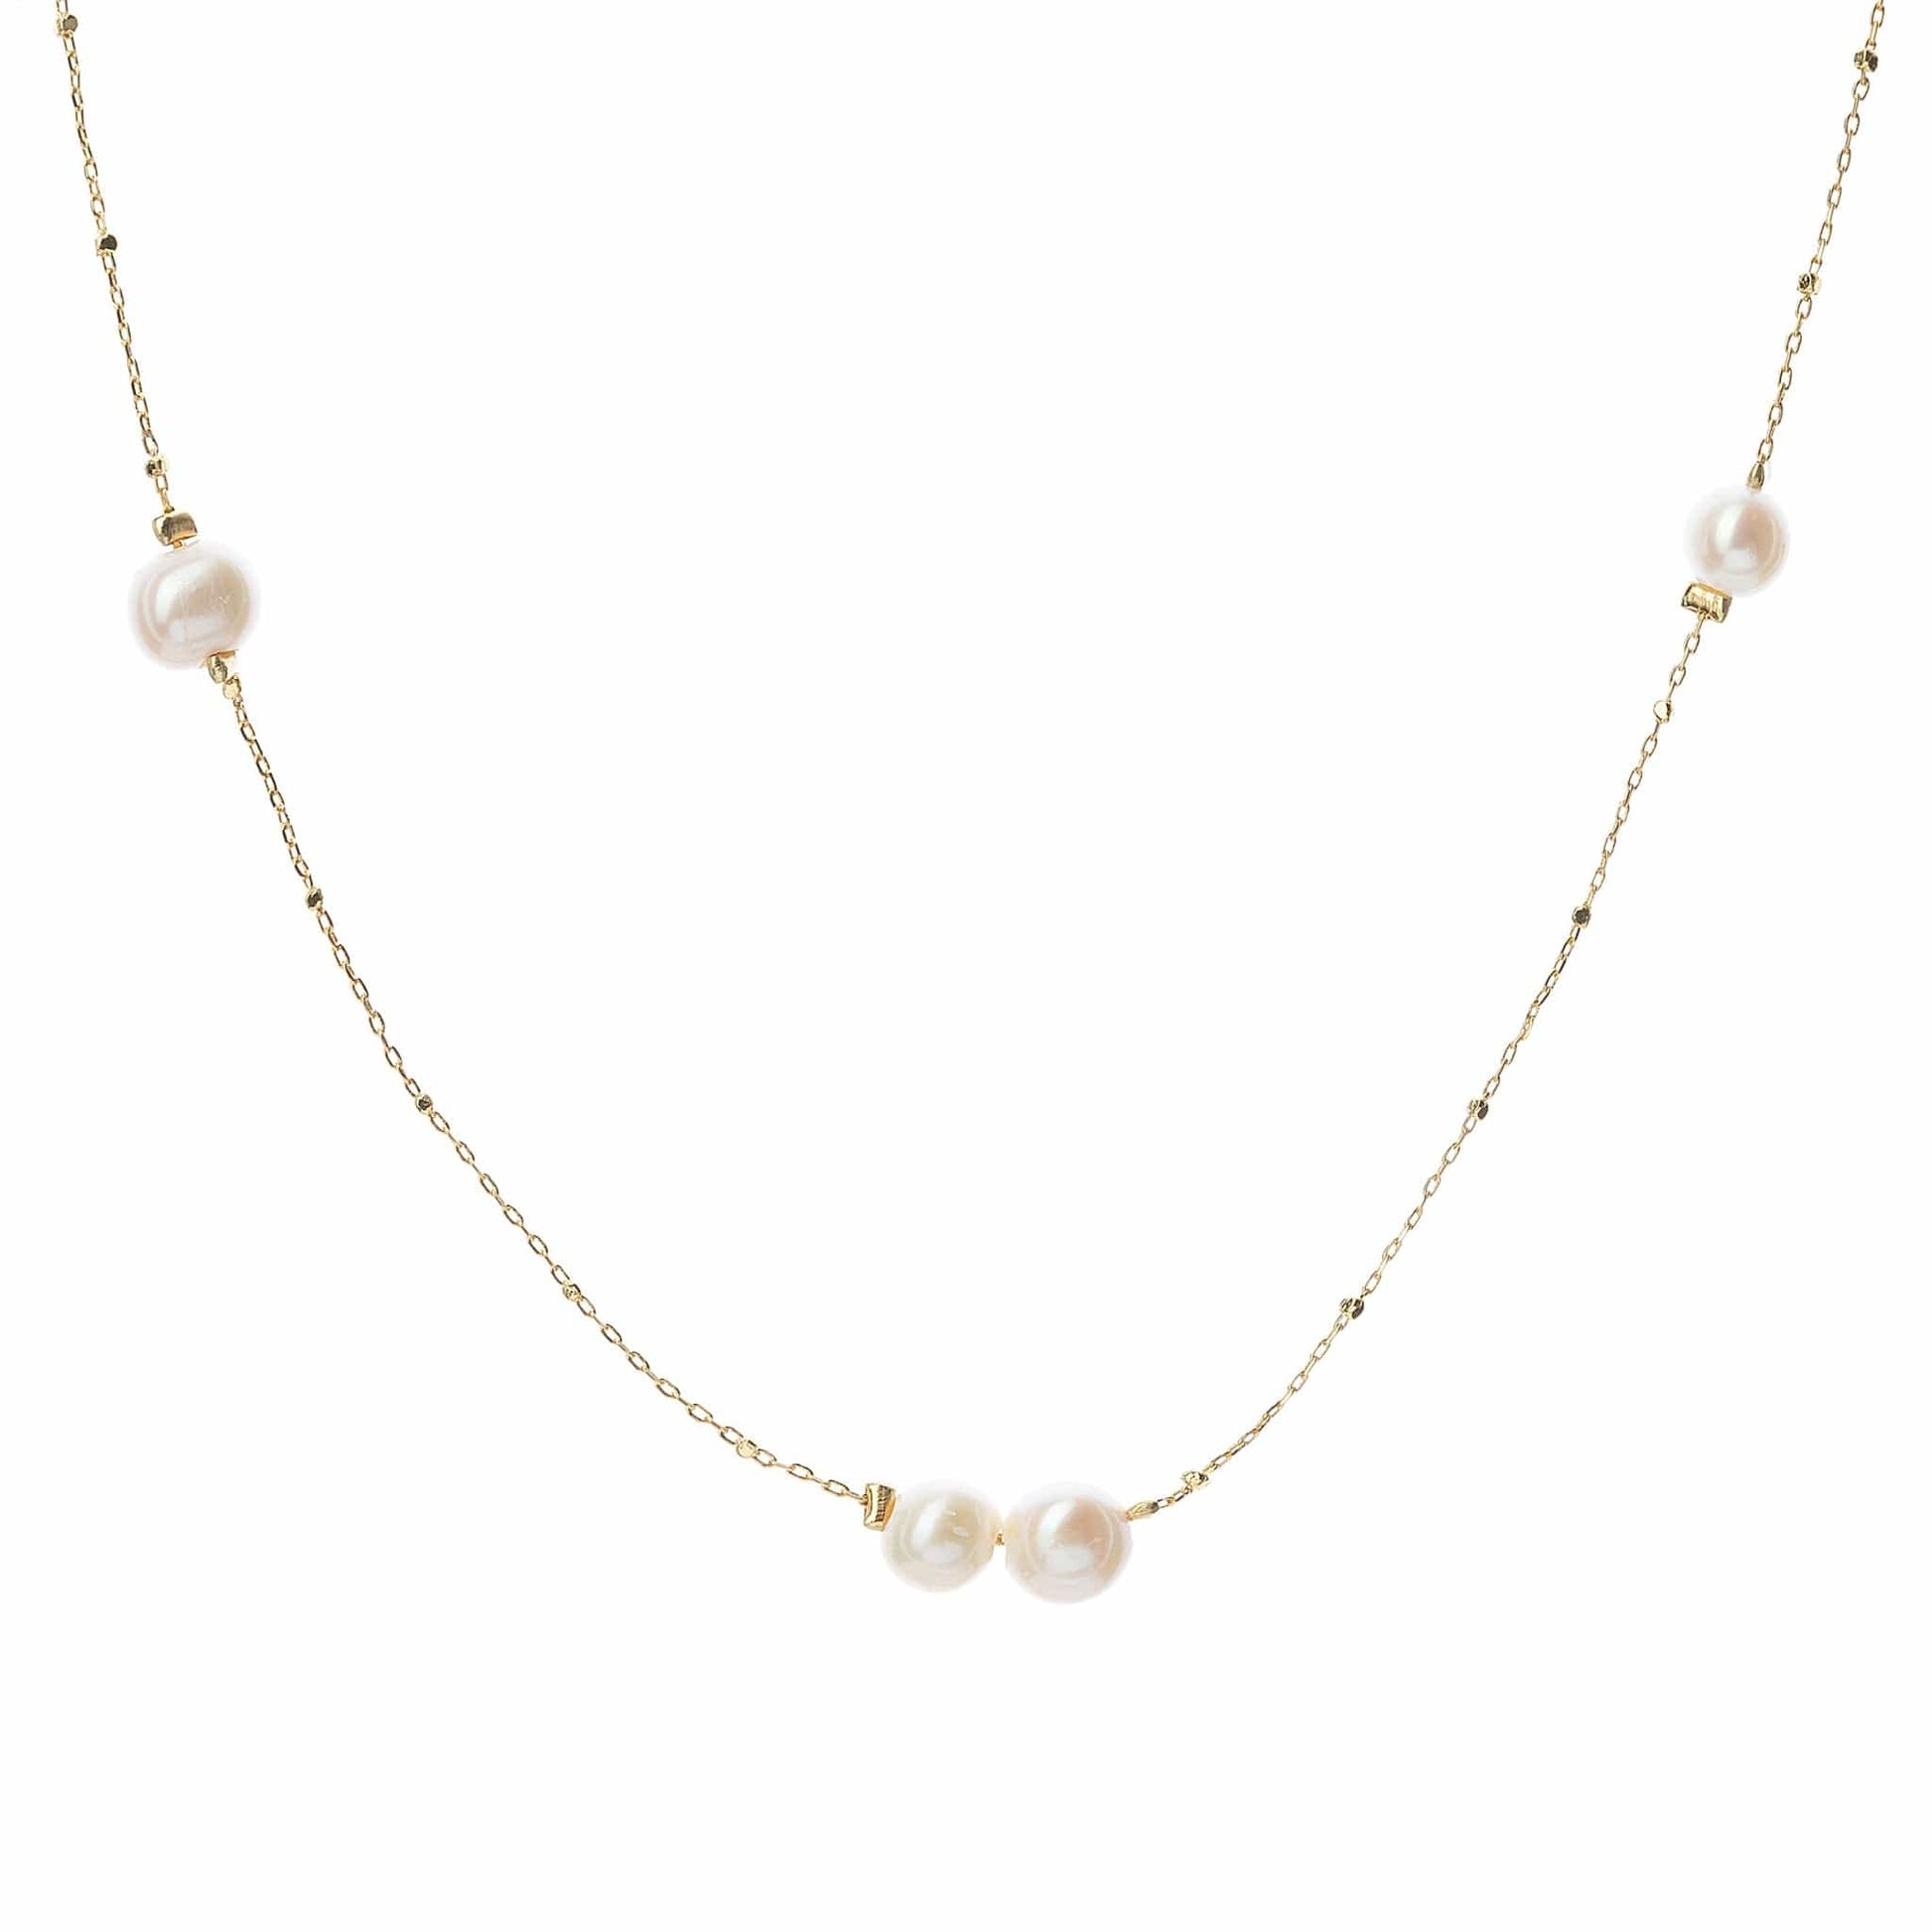 Multi pearl beaded necklace